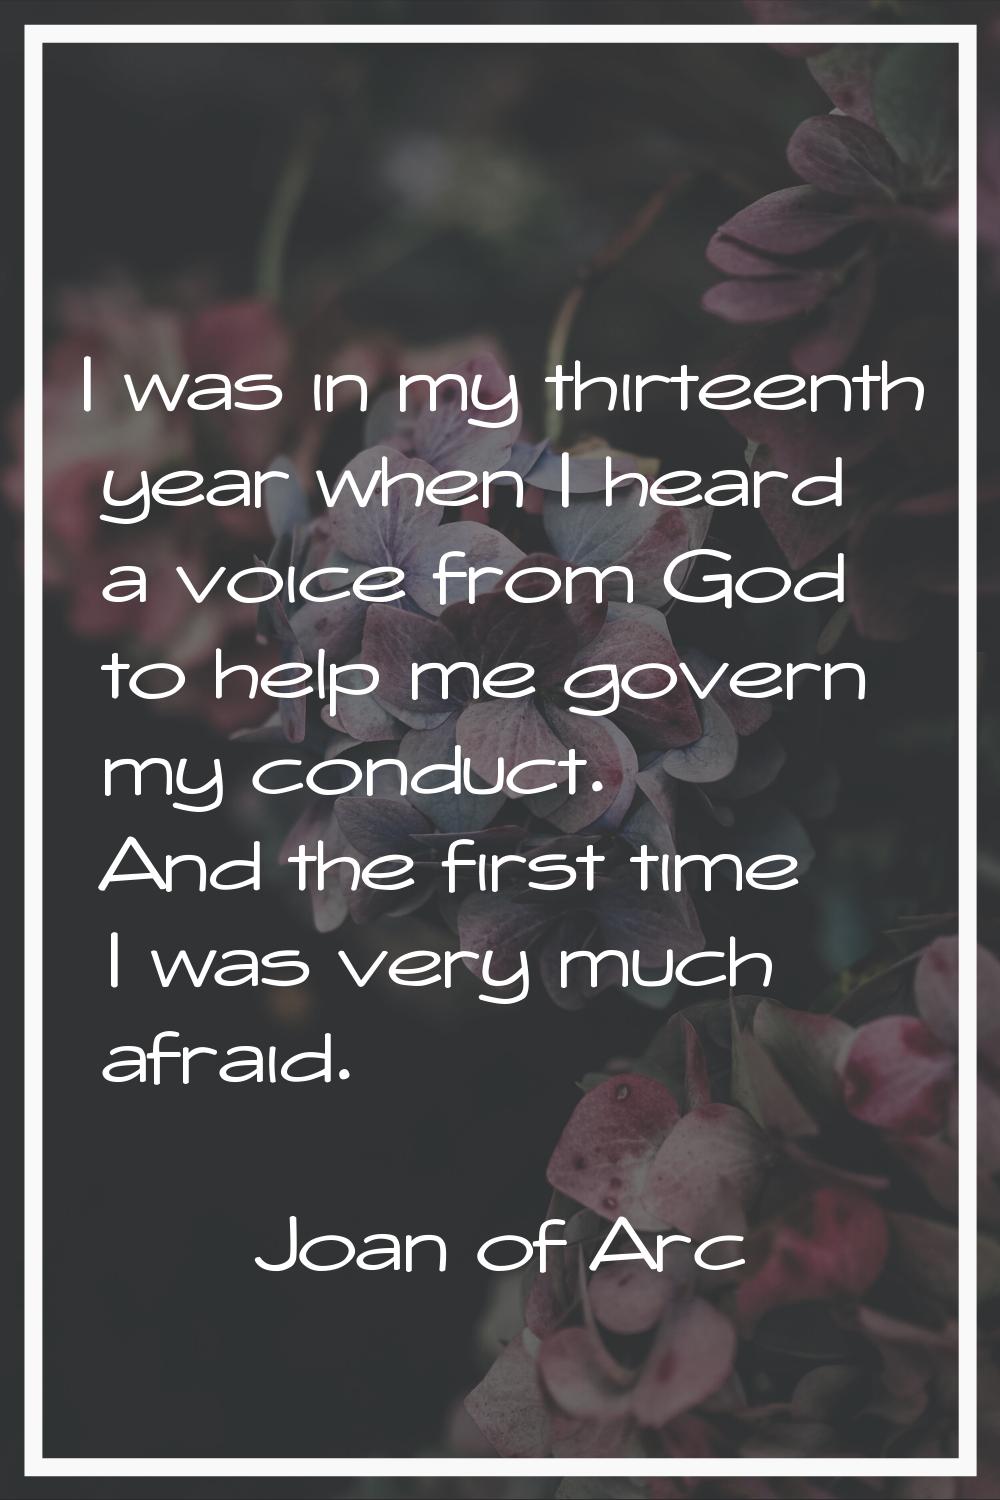 I was in my thirteenth year when I heard a voice from God to help me govern my conduct. And the fir